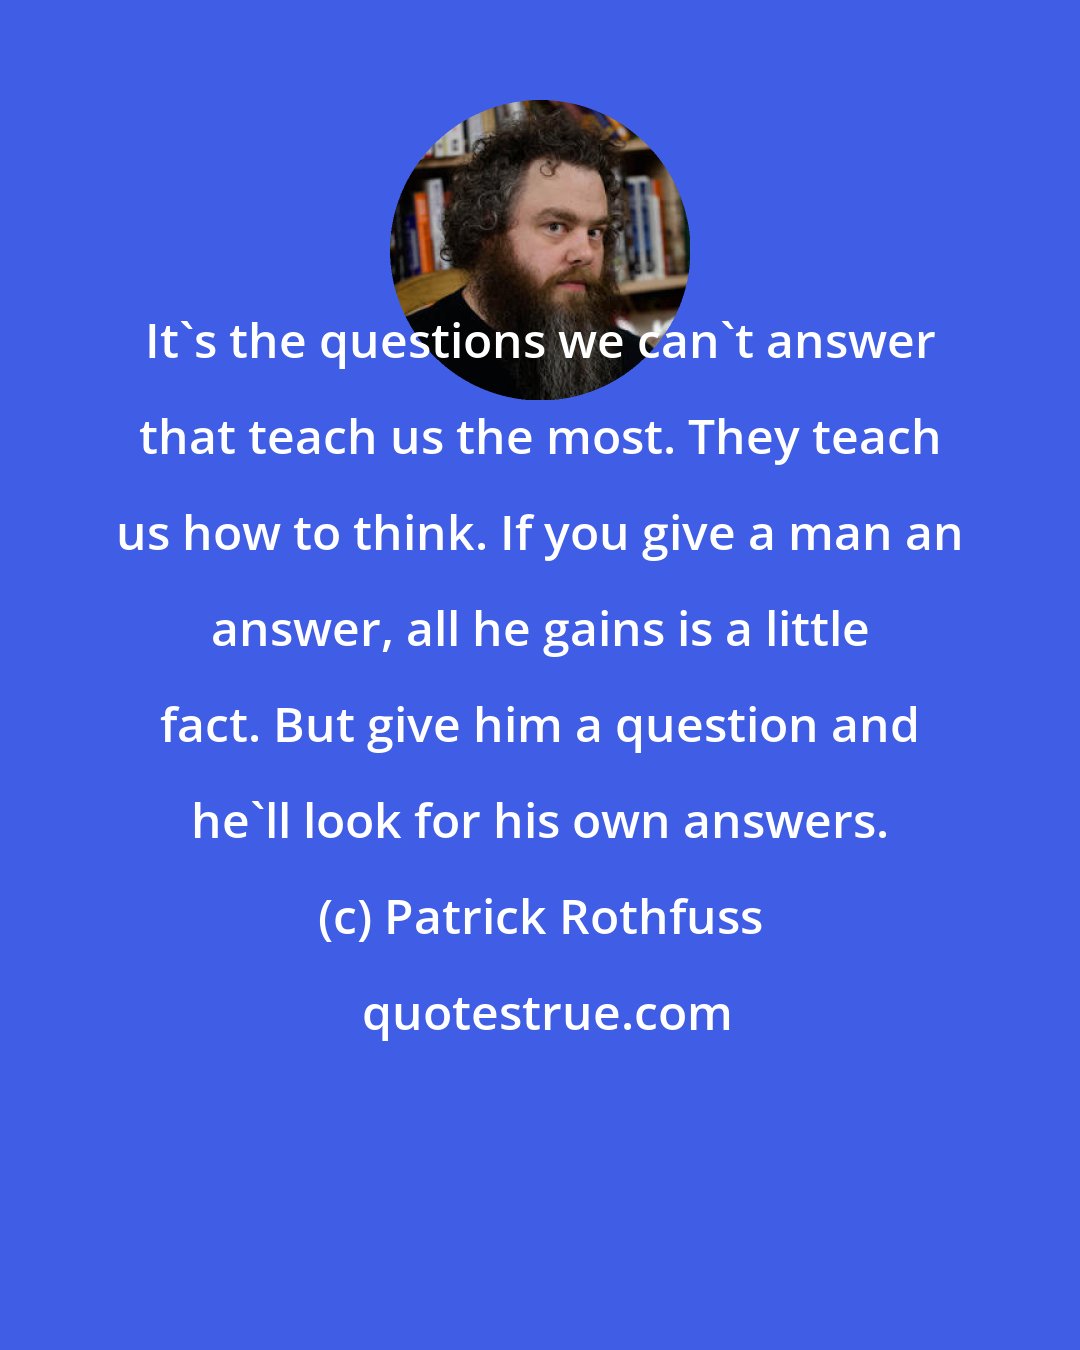 Patrick Rothfuss: It's the questions we can't answer that teach us the most. They teach us how to think. If you give a man an answer, all he gains is a little fact. But give him a question and he'll look for his own answers.